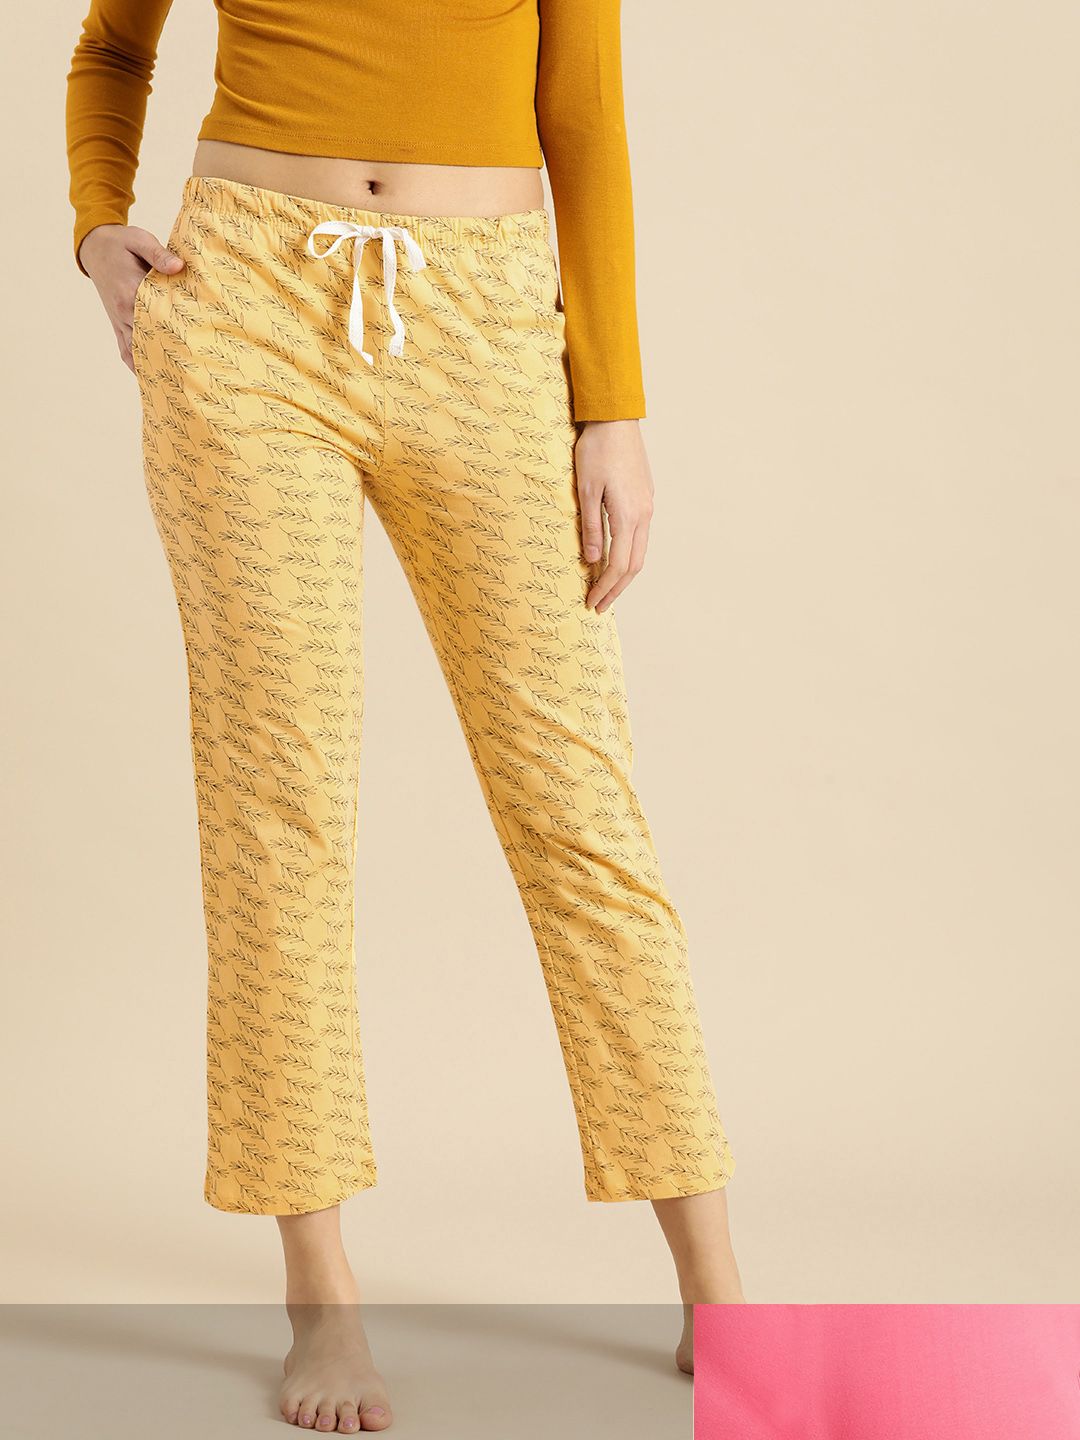 Dreamz by Pantaloons Women Pack Of 2 Yellow & Pink Printed Lounge Pants Price in India